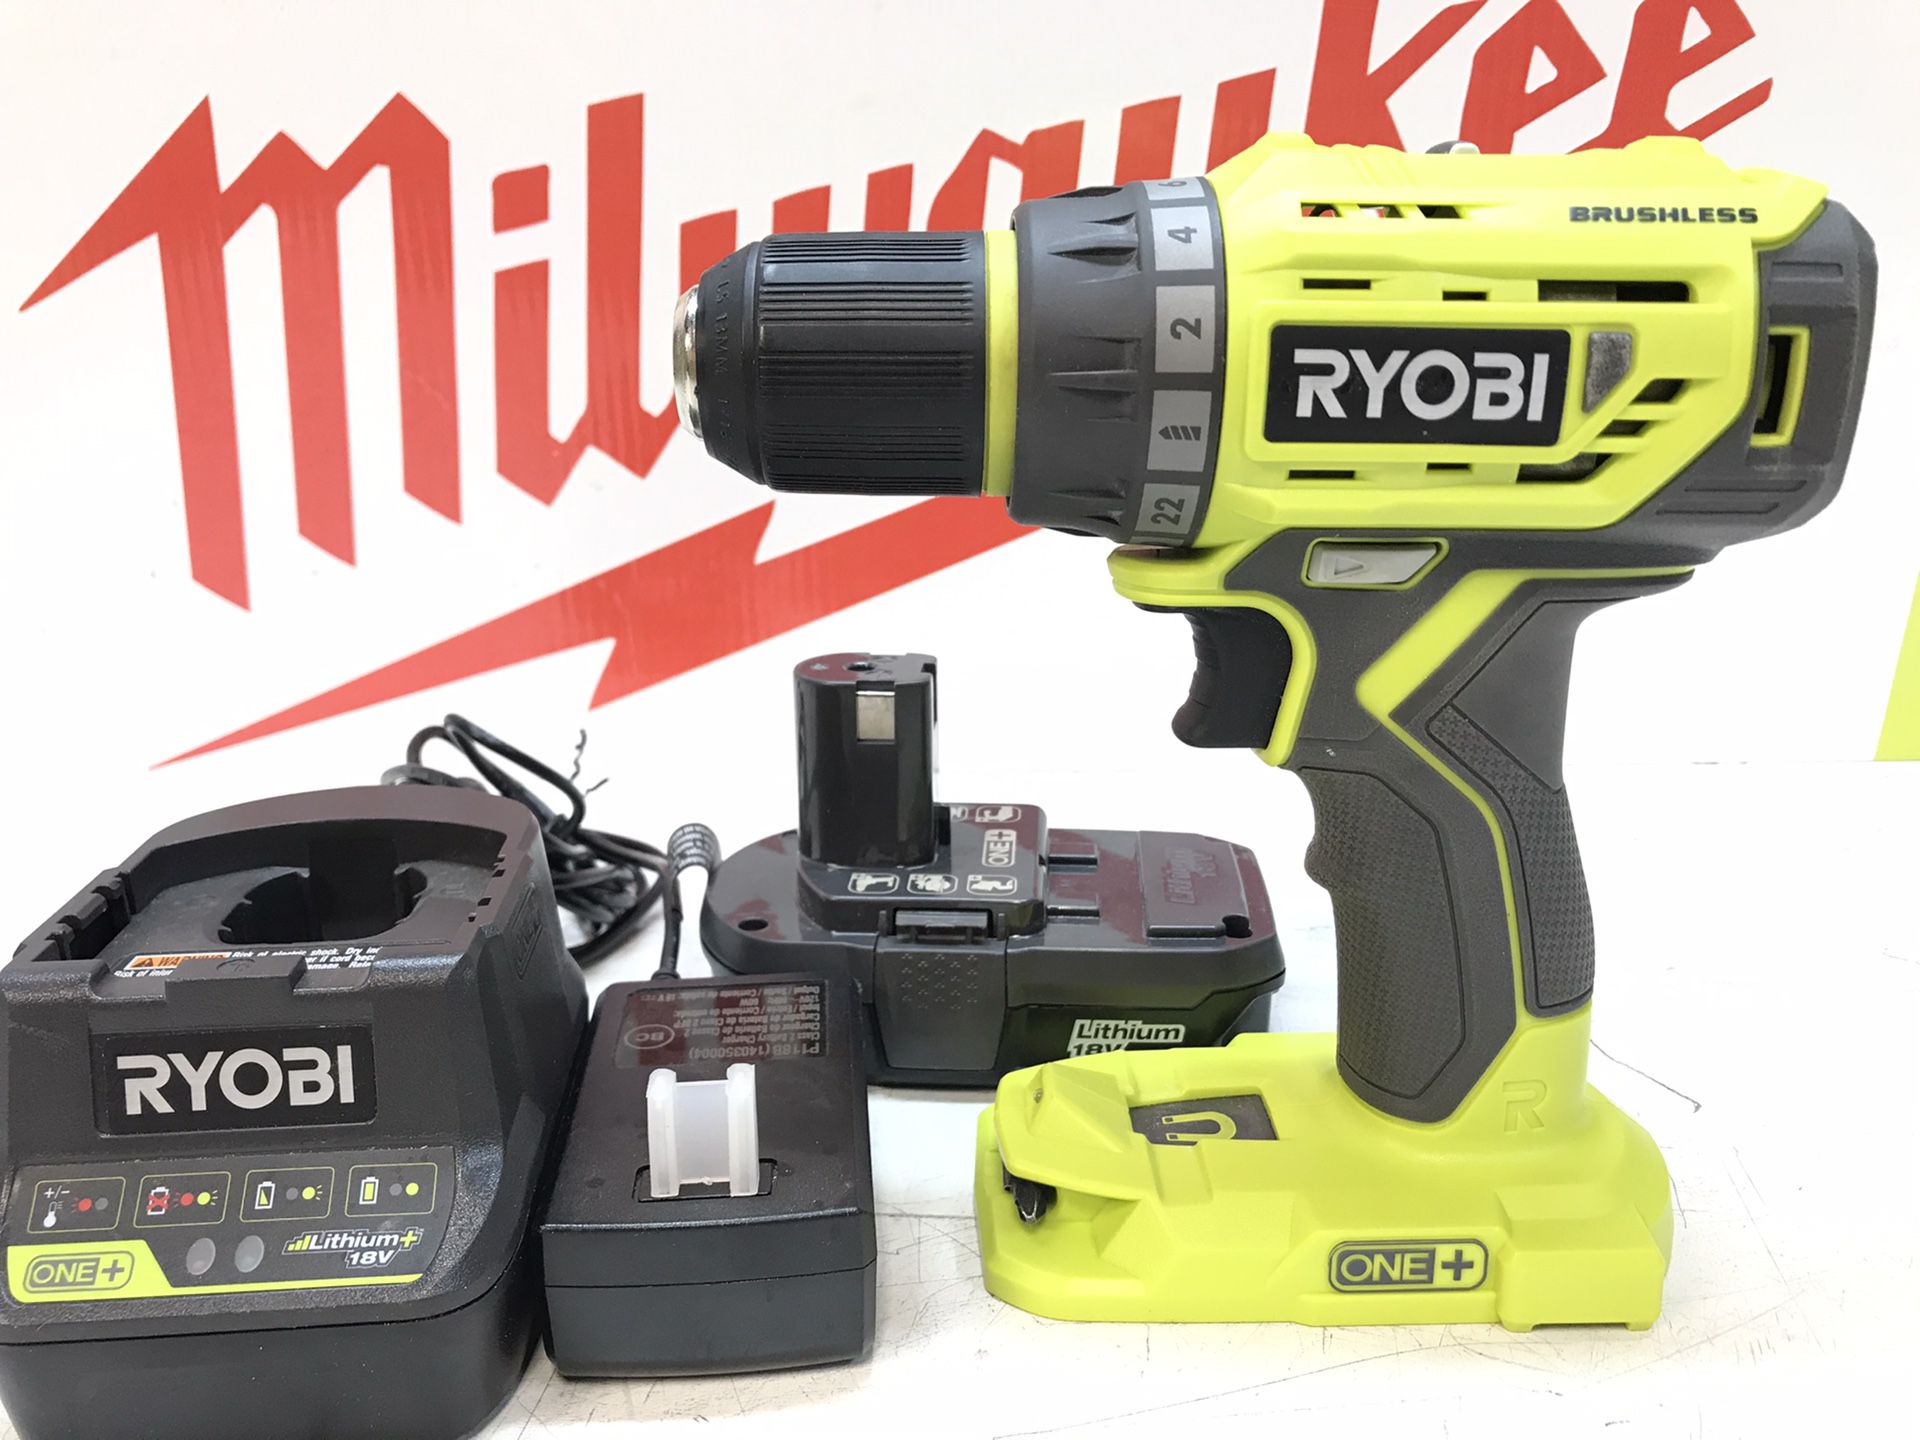 RYOBI 18-Volt ONE+ Lithium-Ion Cordless Brushless 1/2 in. Drill/Driver Kit with 1.3AH Battery, Charger and Bag